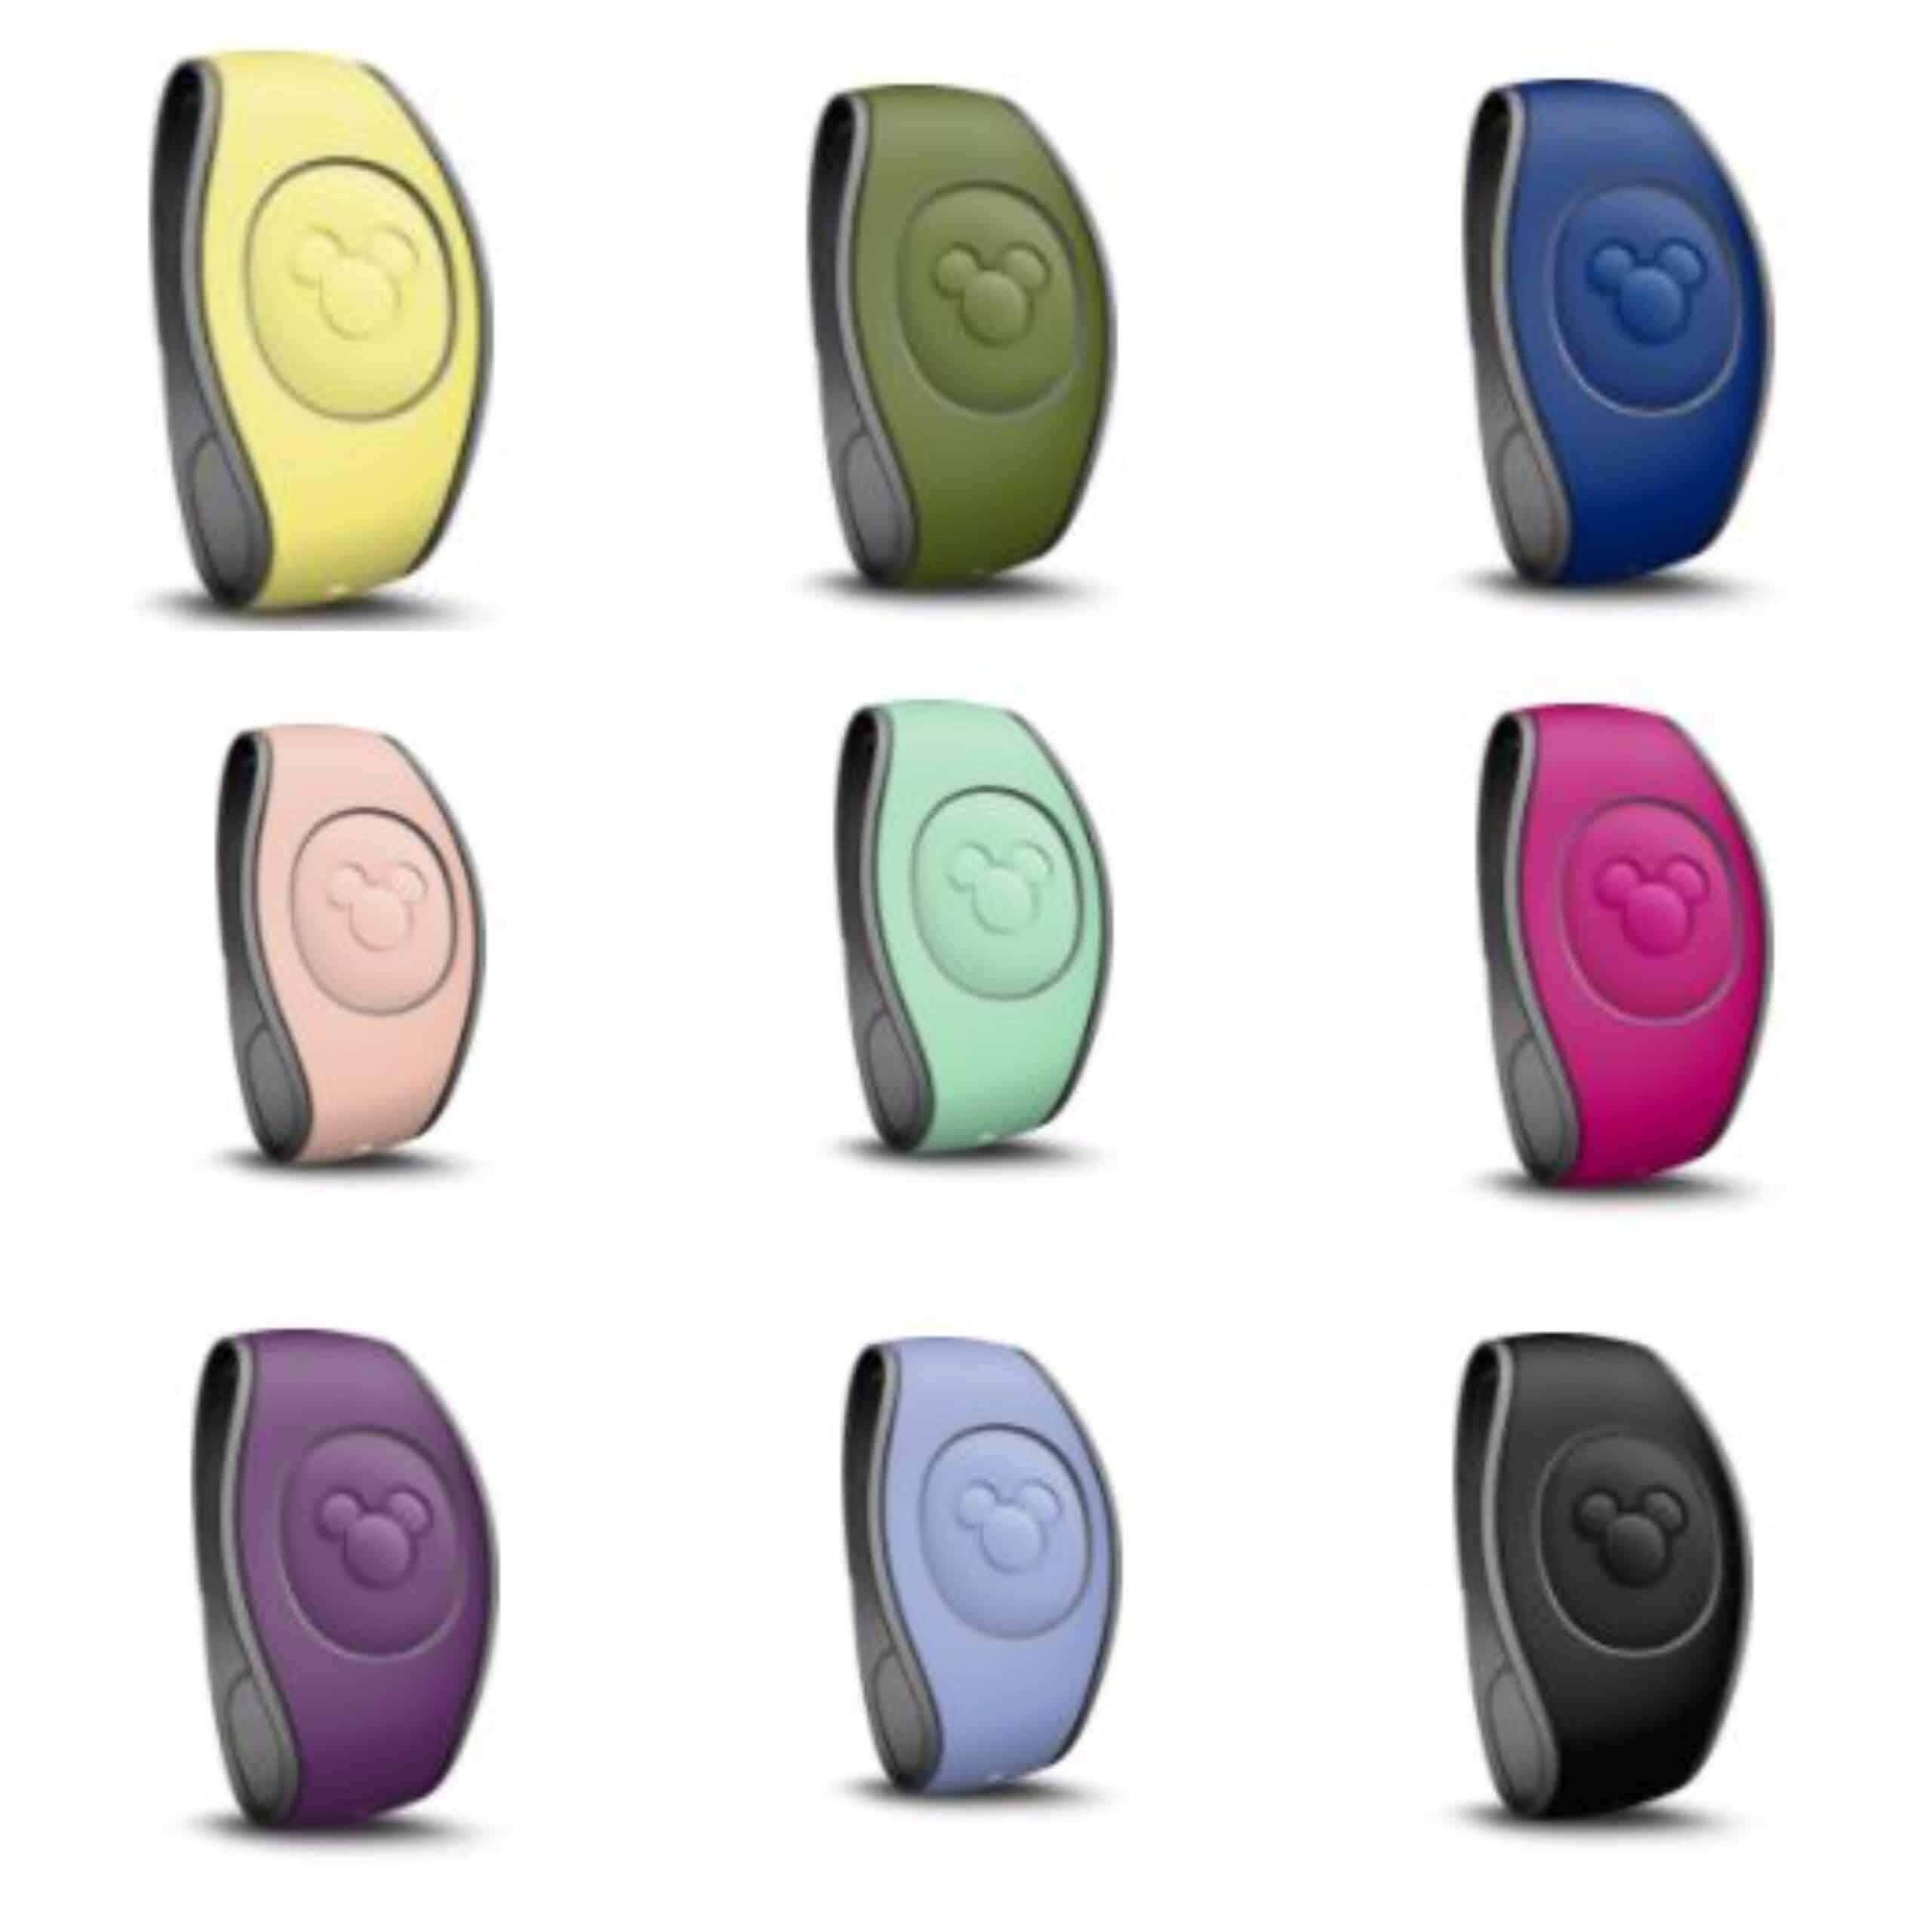 https://www.wdwbloggers.com/wp-content/uploads/2021/02/New-Solid-Color-Magic-Bands-1-scaled.jpg